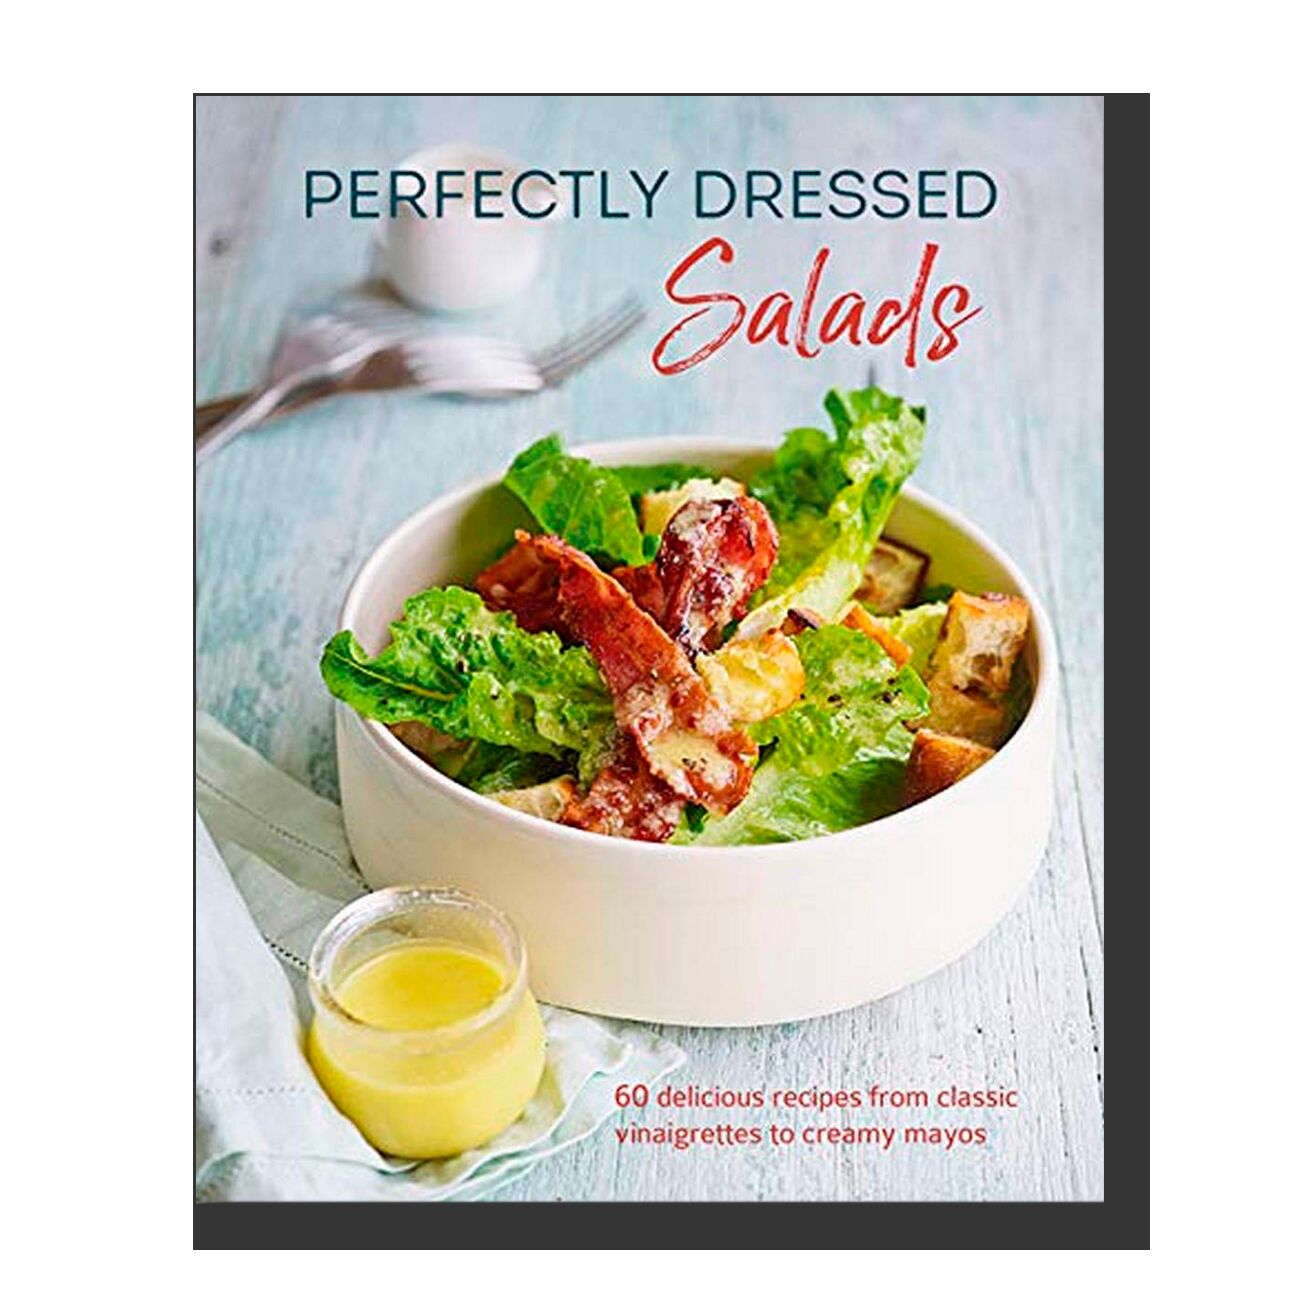 Perfectly Dressed Salads: 60 delicious recipes from tangy vinaigrettes to creamy mayos